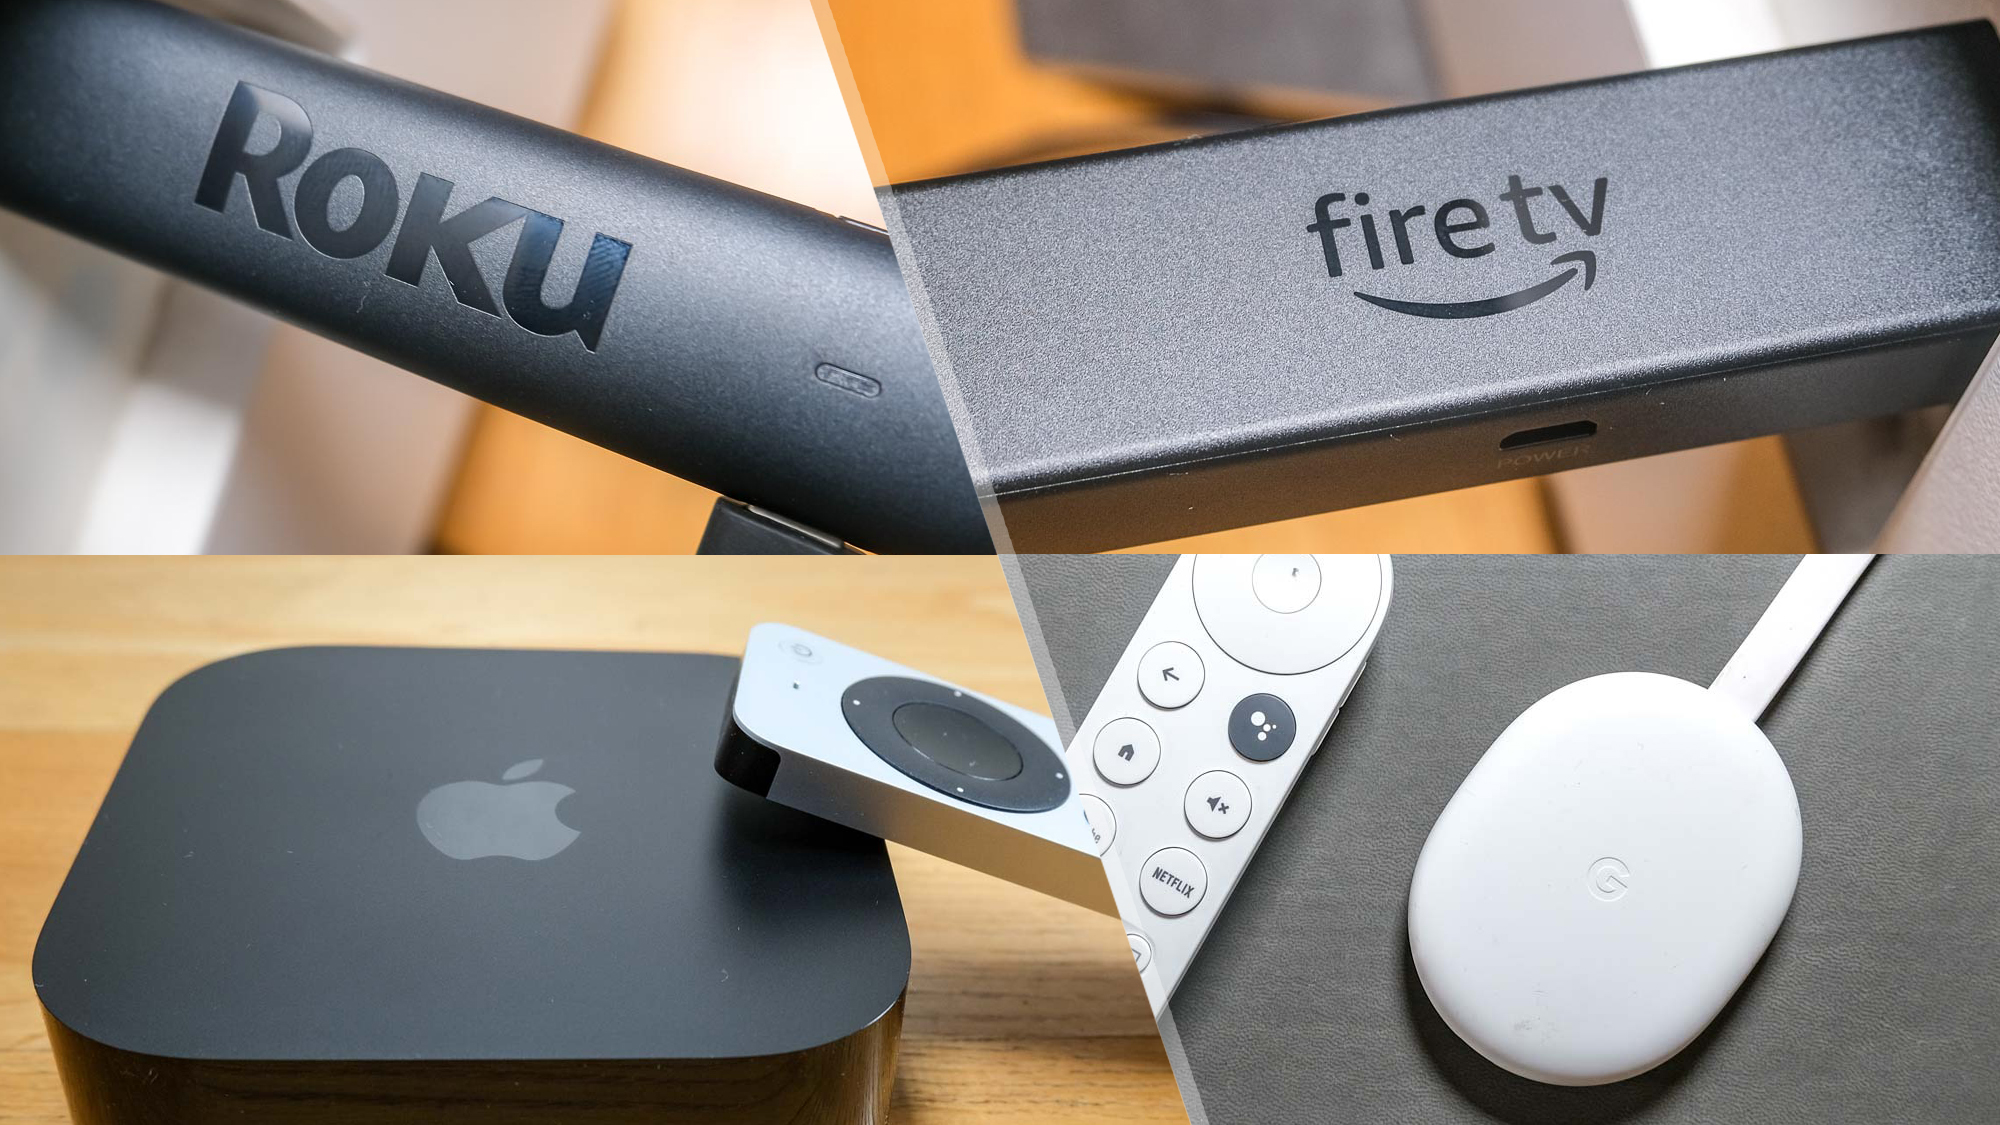 Roku vs Fire Stick, which is better?